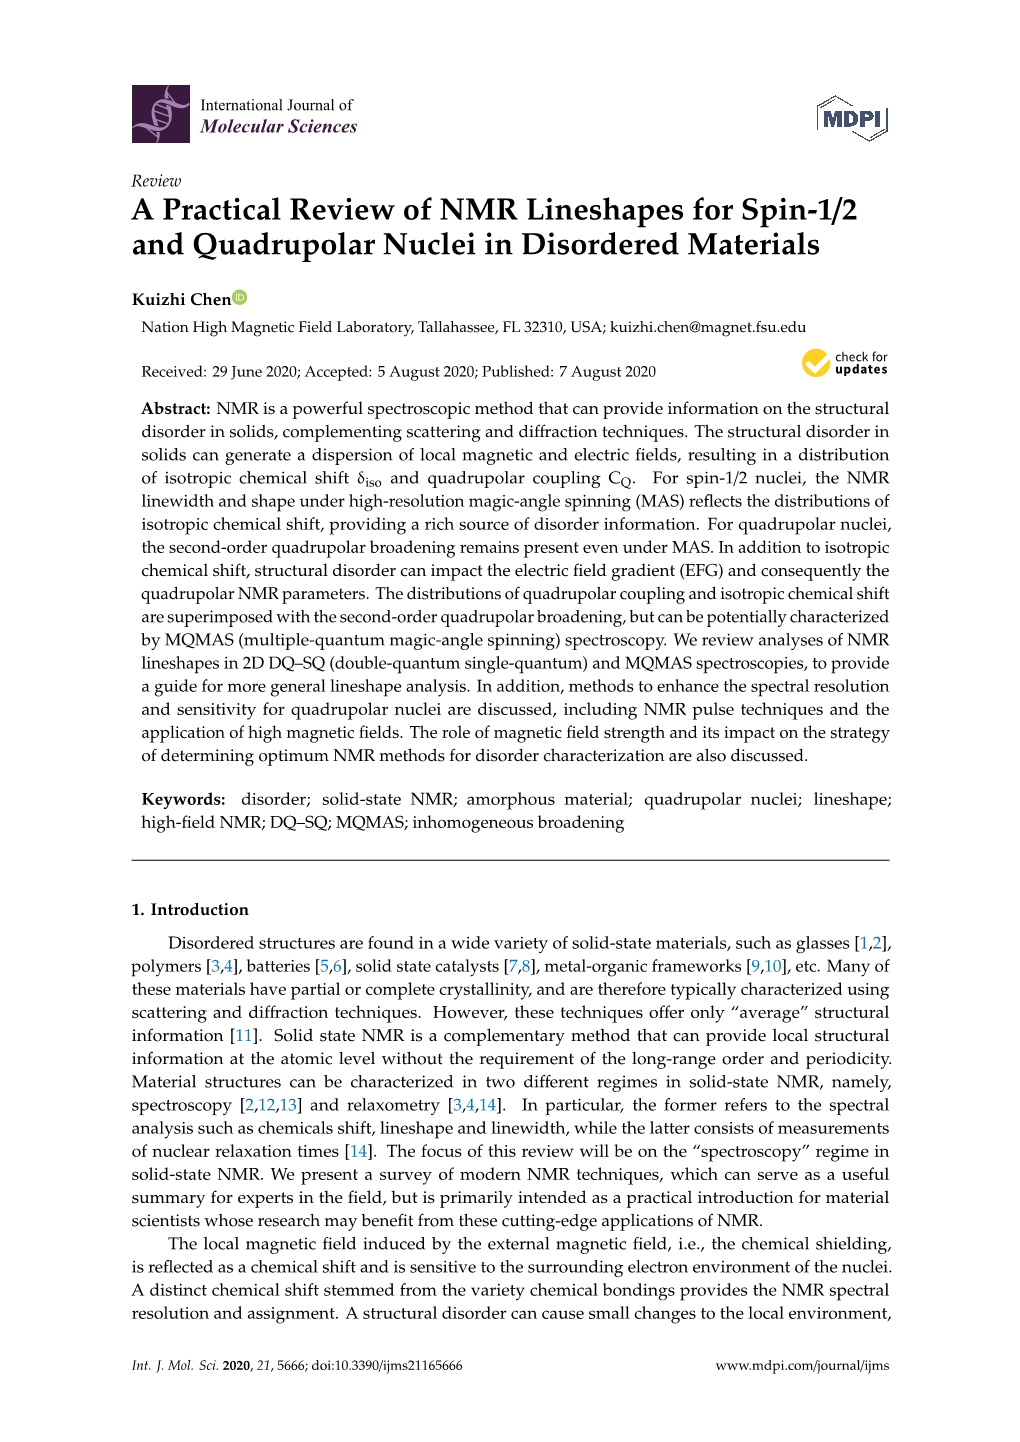 A Practical Review of NMR Lineshapes for Spin-1/2 and Quadrupolar Nuclei in Disordered Materials